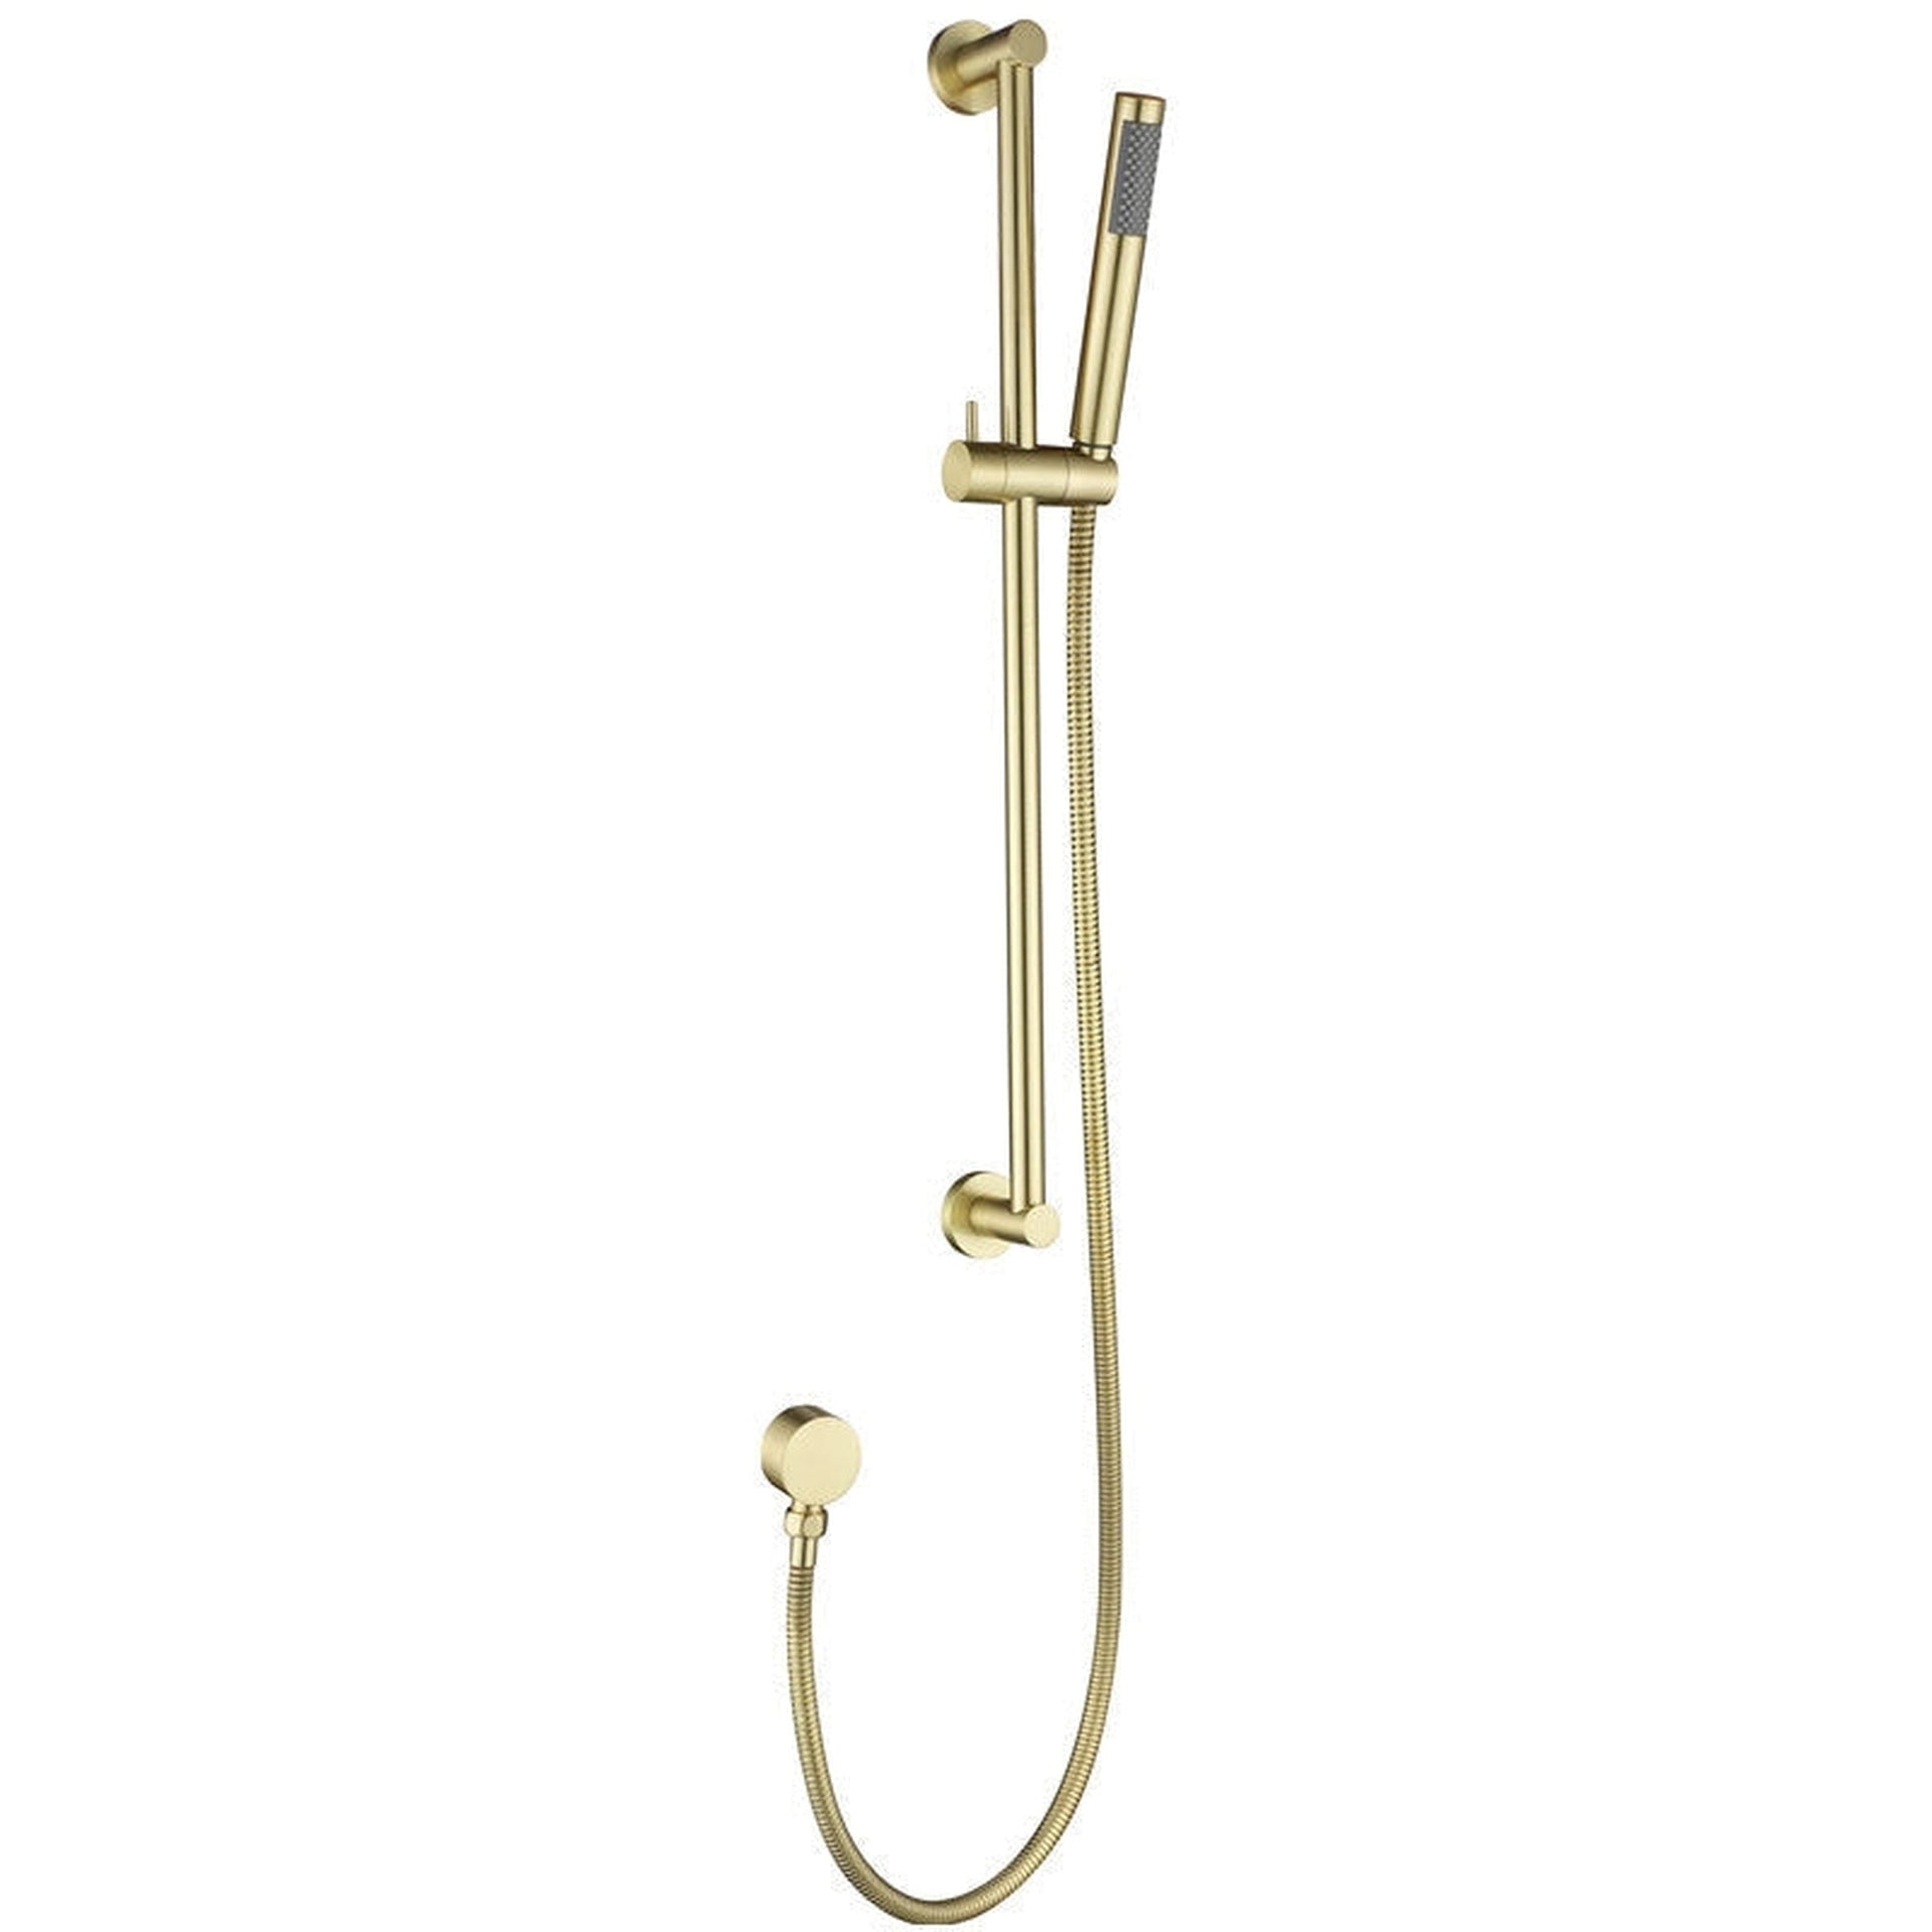 FontanaShowers Verona Creative Luxury 12" Brushed Gold Square Ceiling Mounted Thermostatic Button Mixer Rainfall Shower System With 6-Jet Body Sprays and Hand Shower